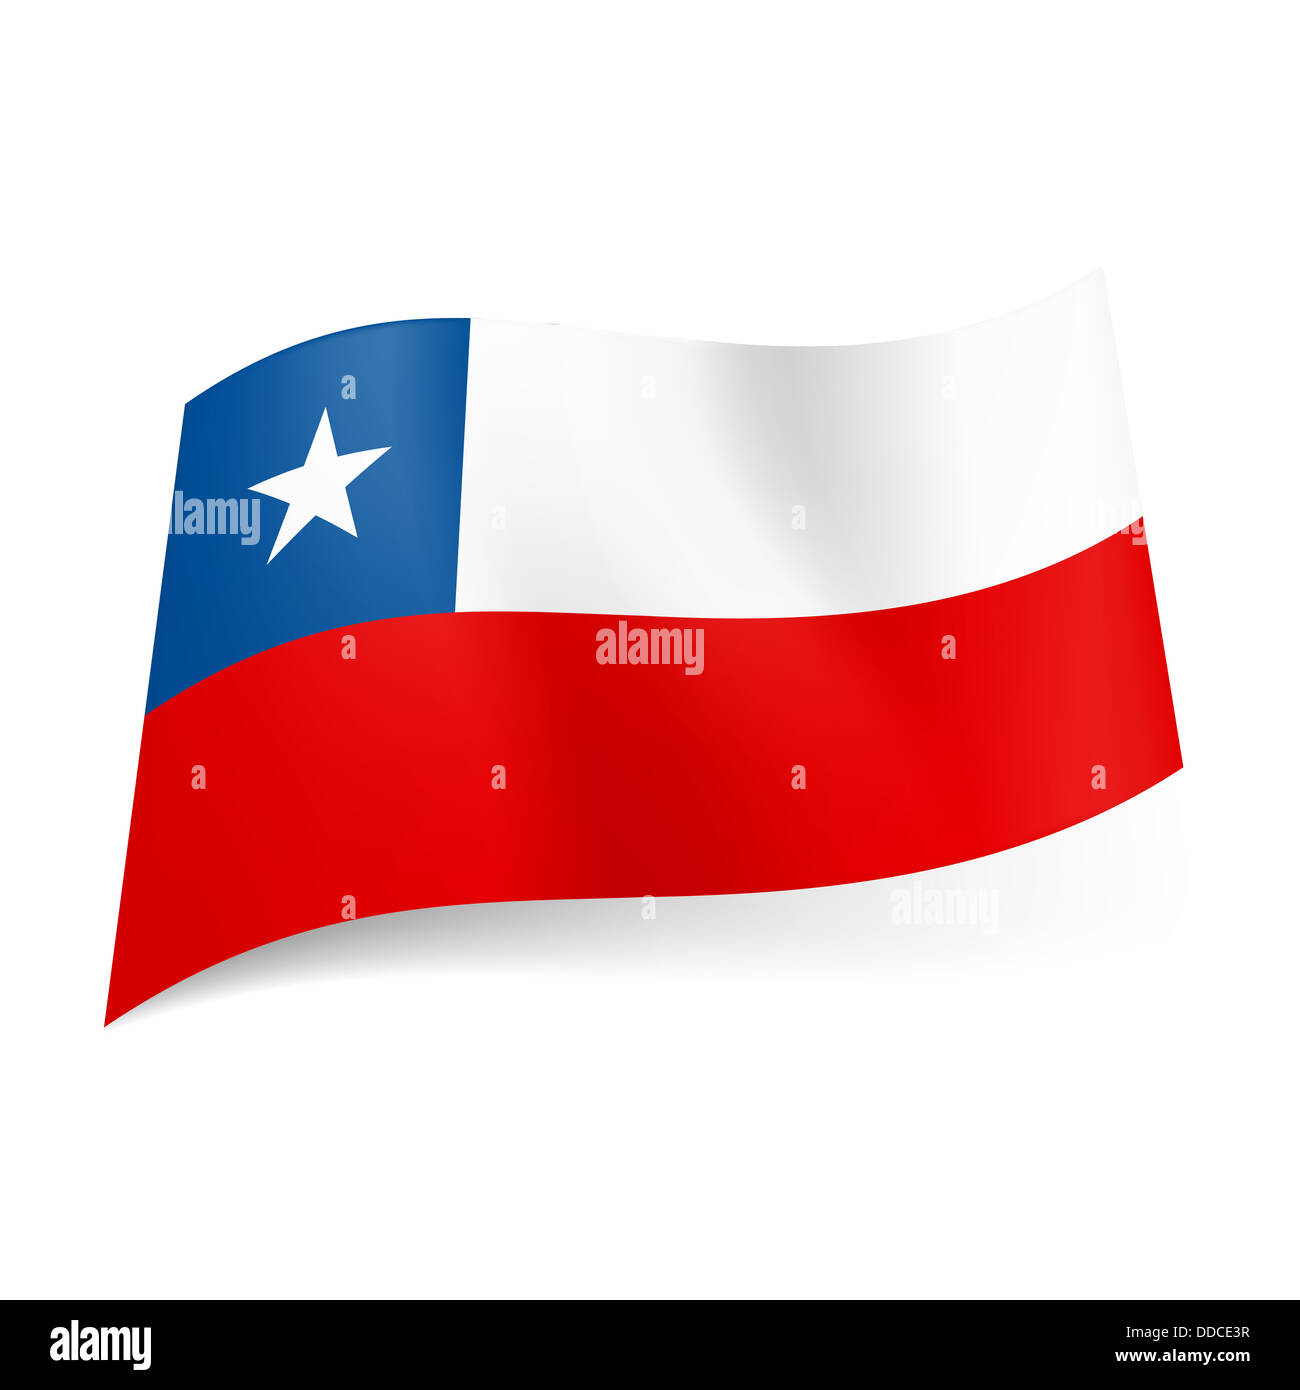 National flag of Chile: unequal white and stripes, blue square with white star on upper Stock Photo - Alamy